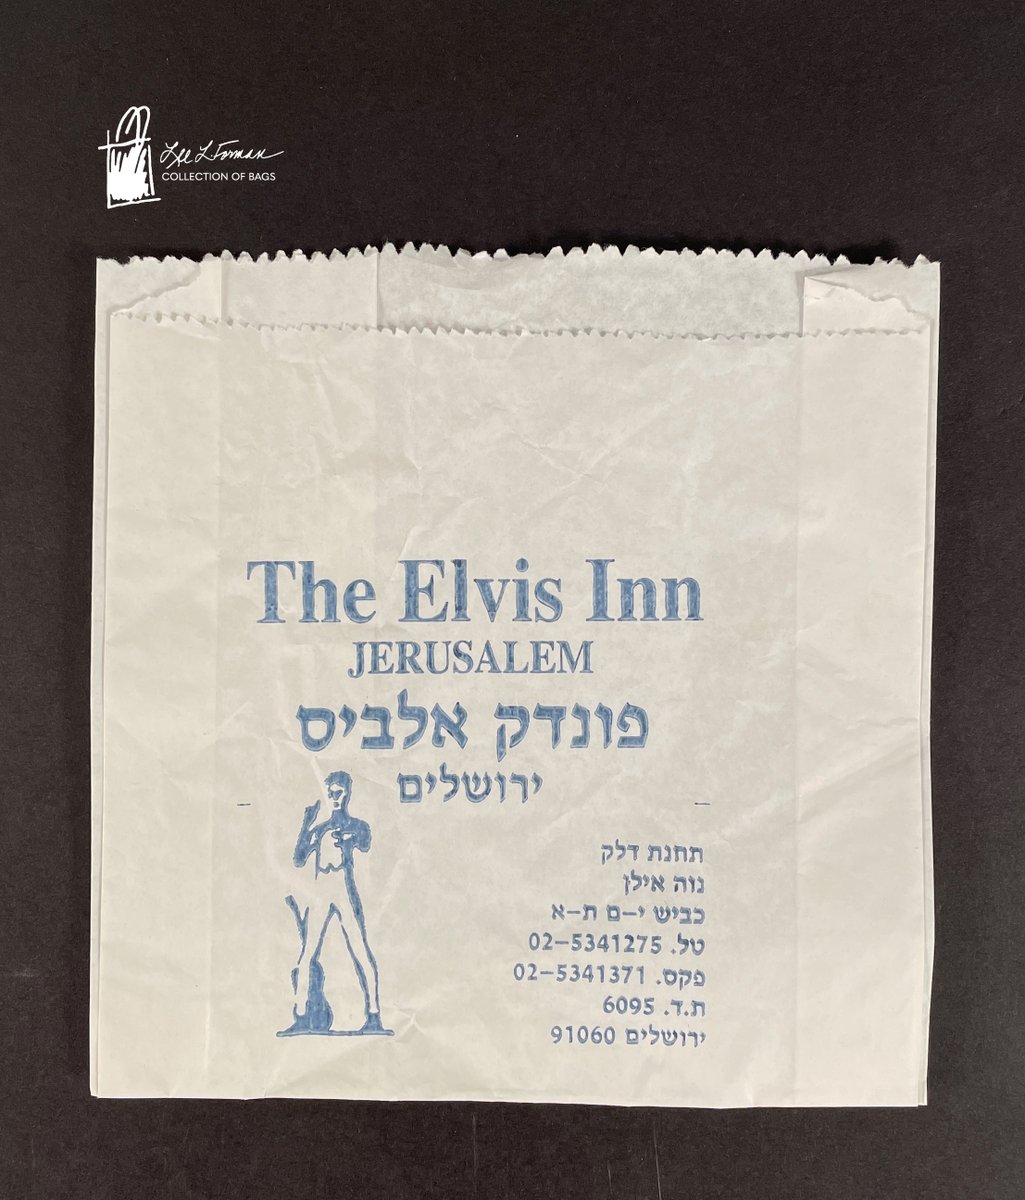 27/365: Did you know that you can visit a roadside diner dedicated to all things Elvis Presley in Neve Ilan, a small town outside of Jerusalem, Israel? They hold more than 700 items of Elvis memorabilia and host Elvis impersonators during the year.